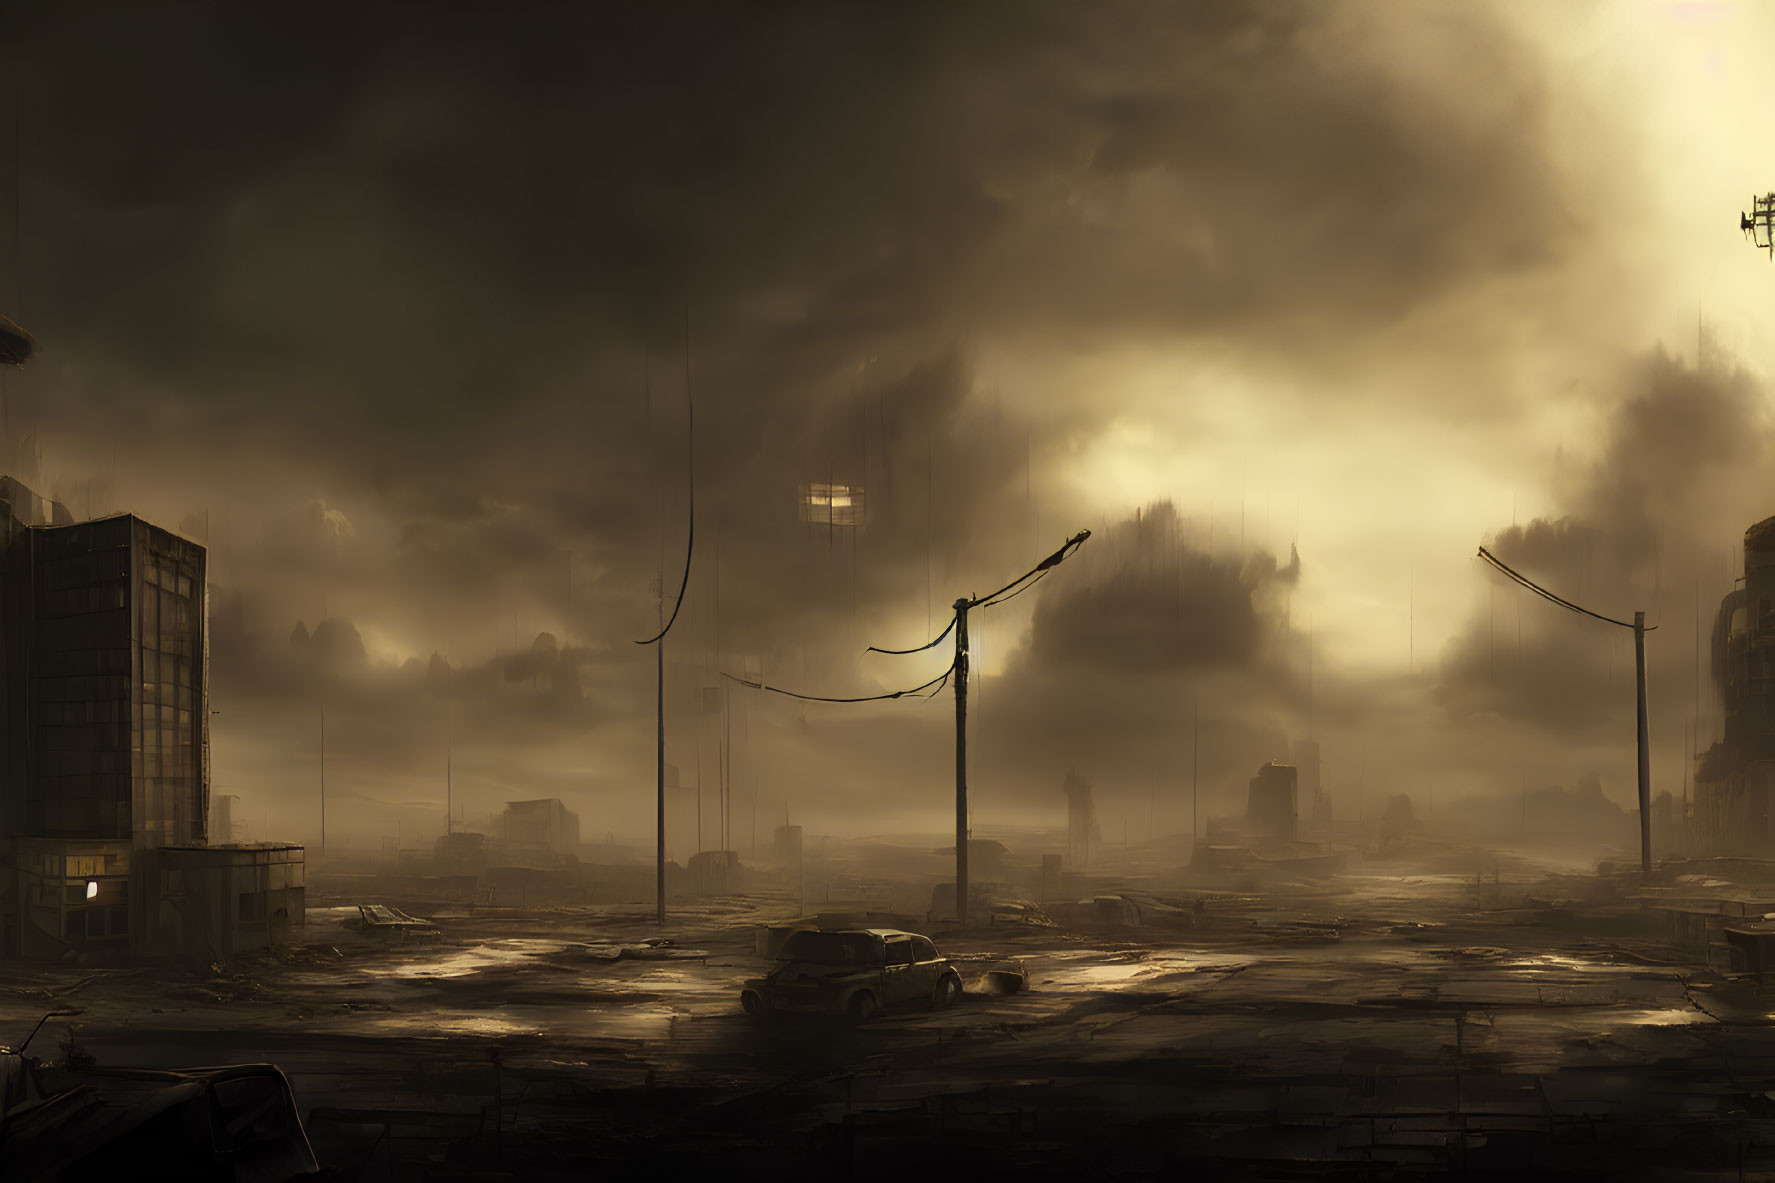 Desolate post-apocalyptic cityscape with ominous clouds